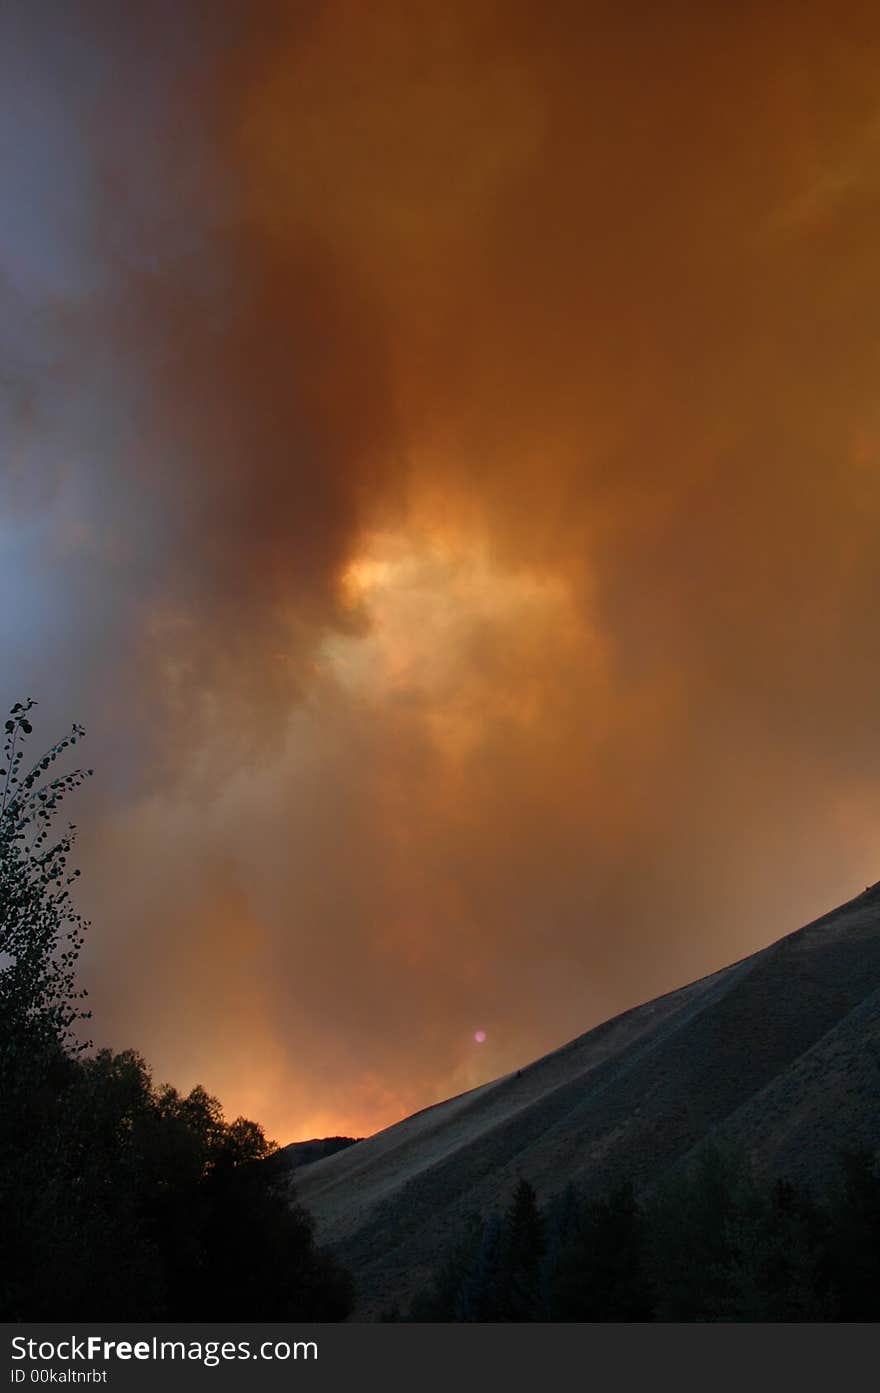 The Castle Rock fire near Ketchum, Idaho turned the night sky red in the summer of 2007. The Castle Rock fire near Ketchum, Idaho turned the night sky red in the summer of 2007.